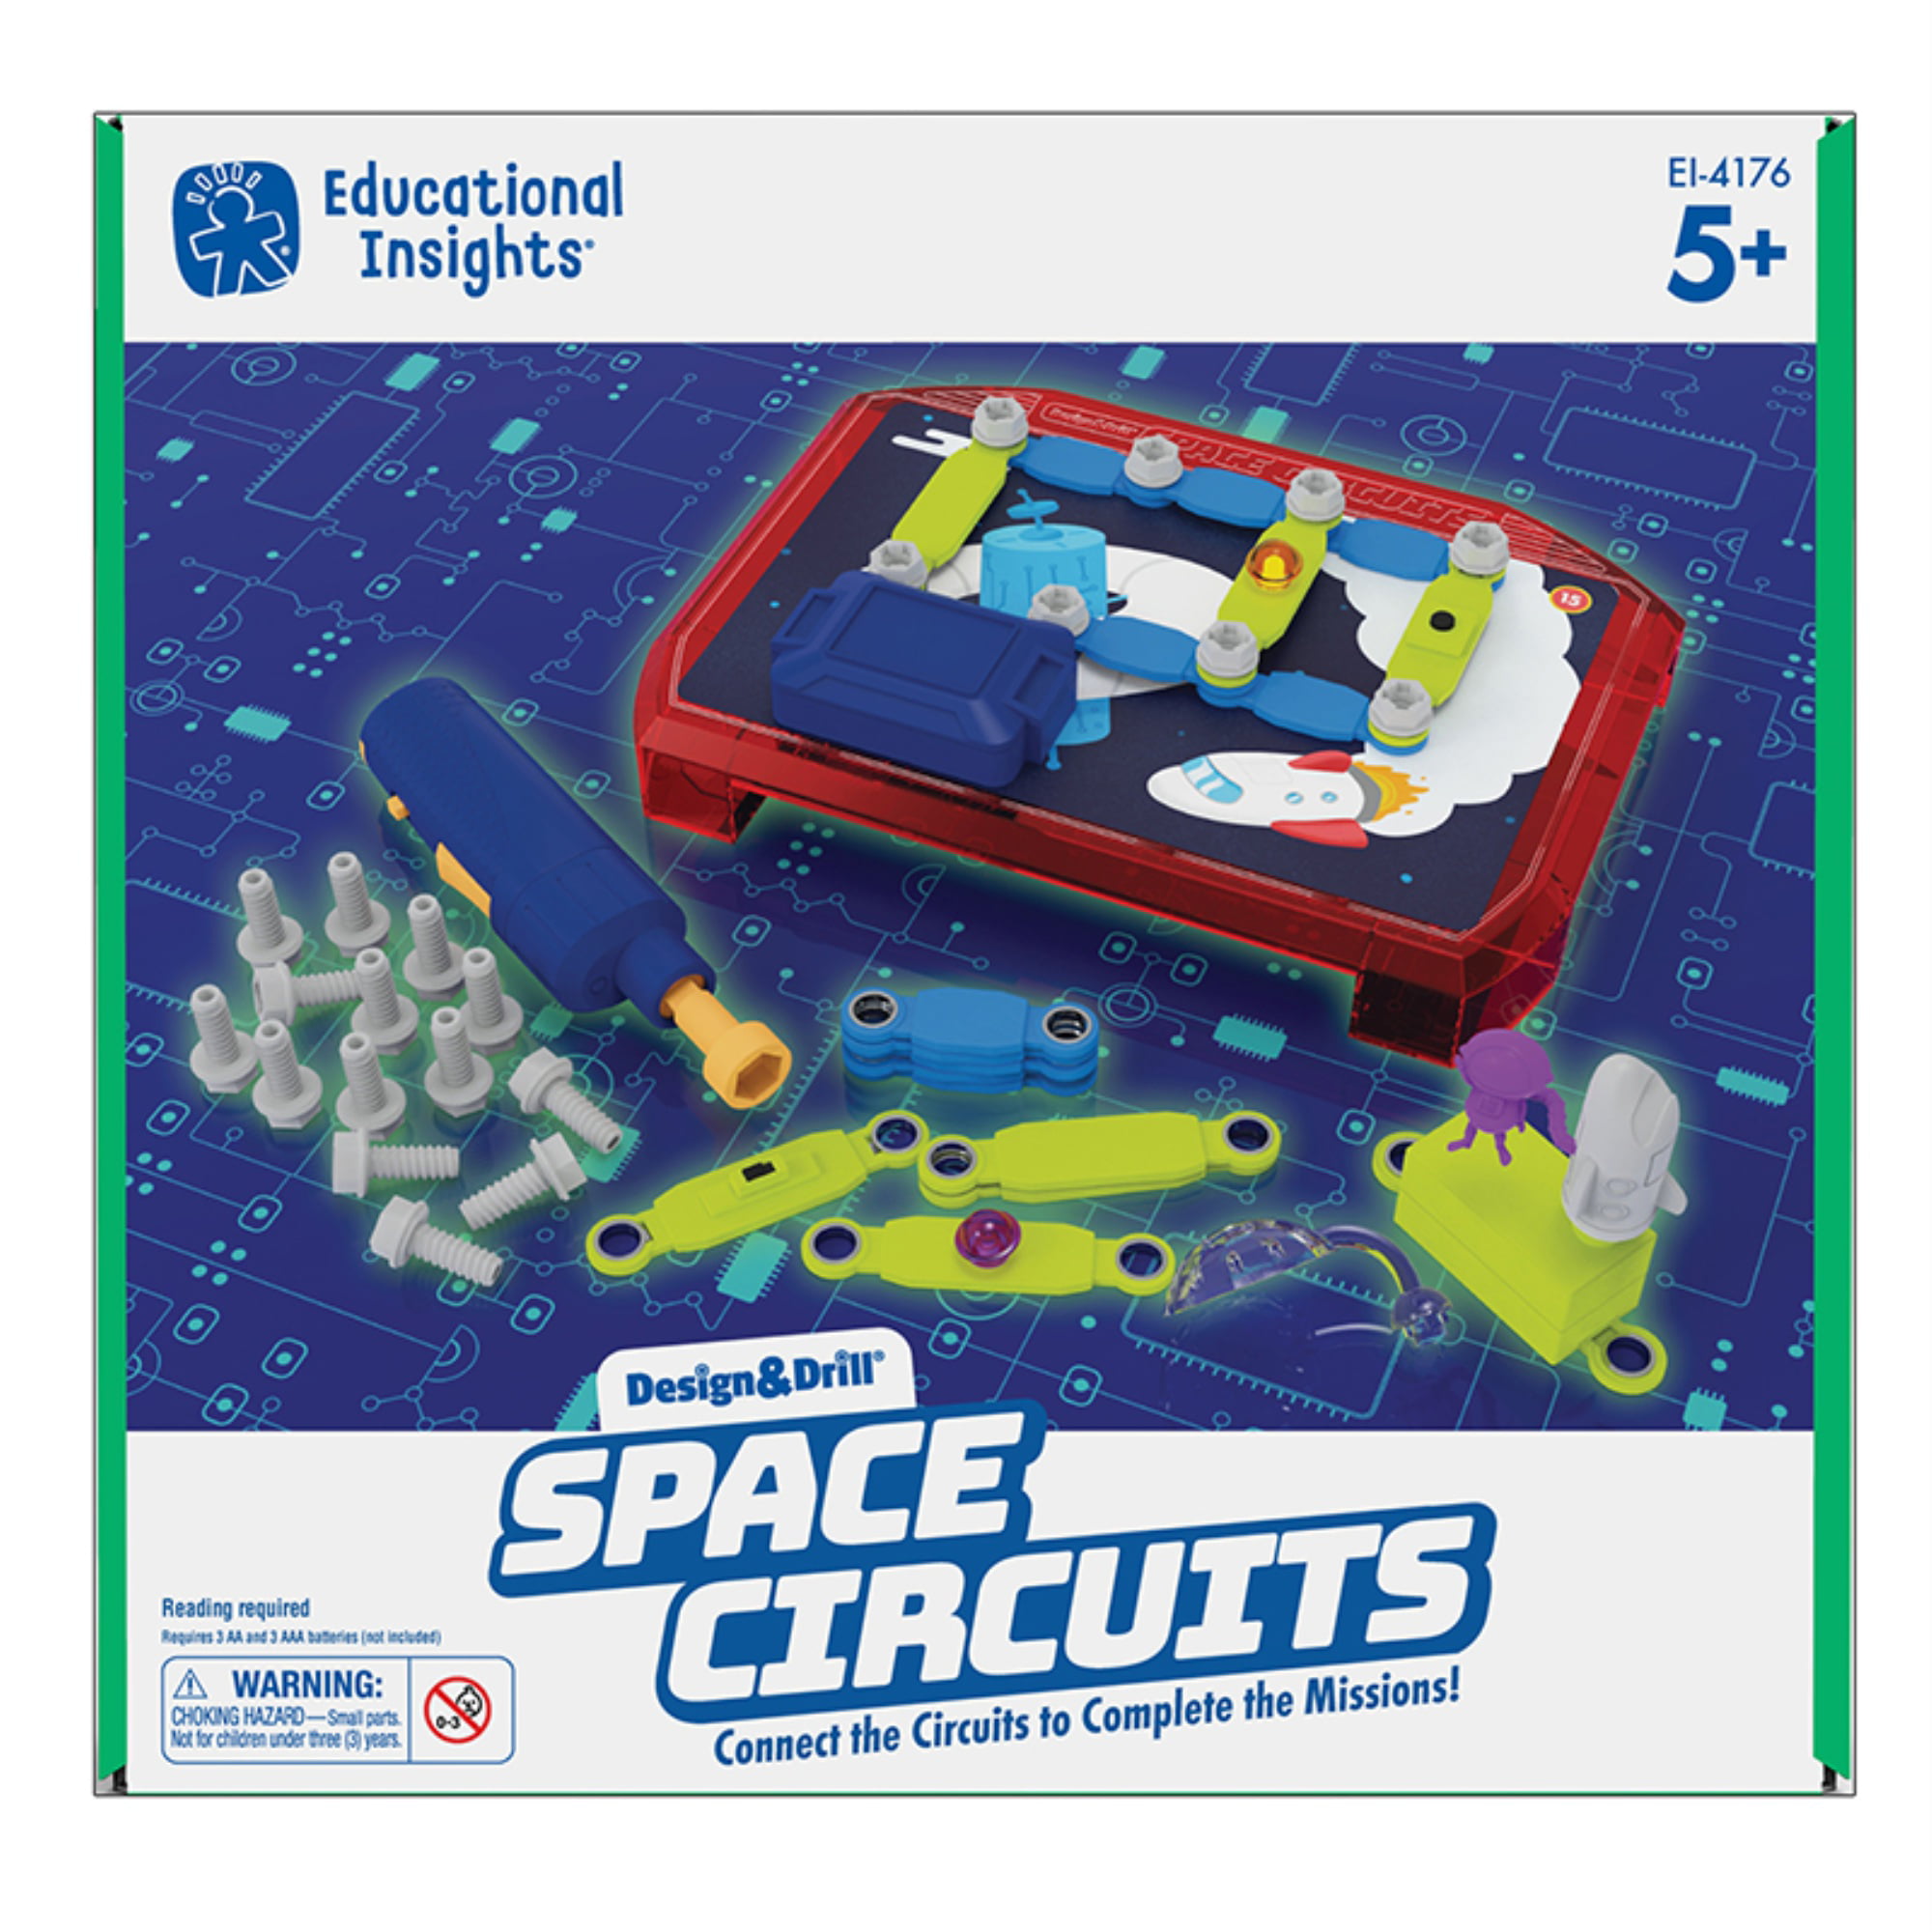 4M Cosmic Rocket Kit Ts3433 Learning Playset for sale online 